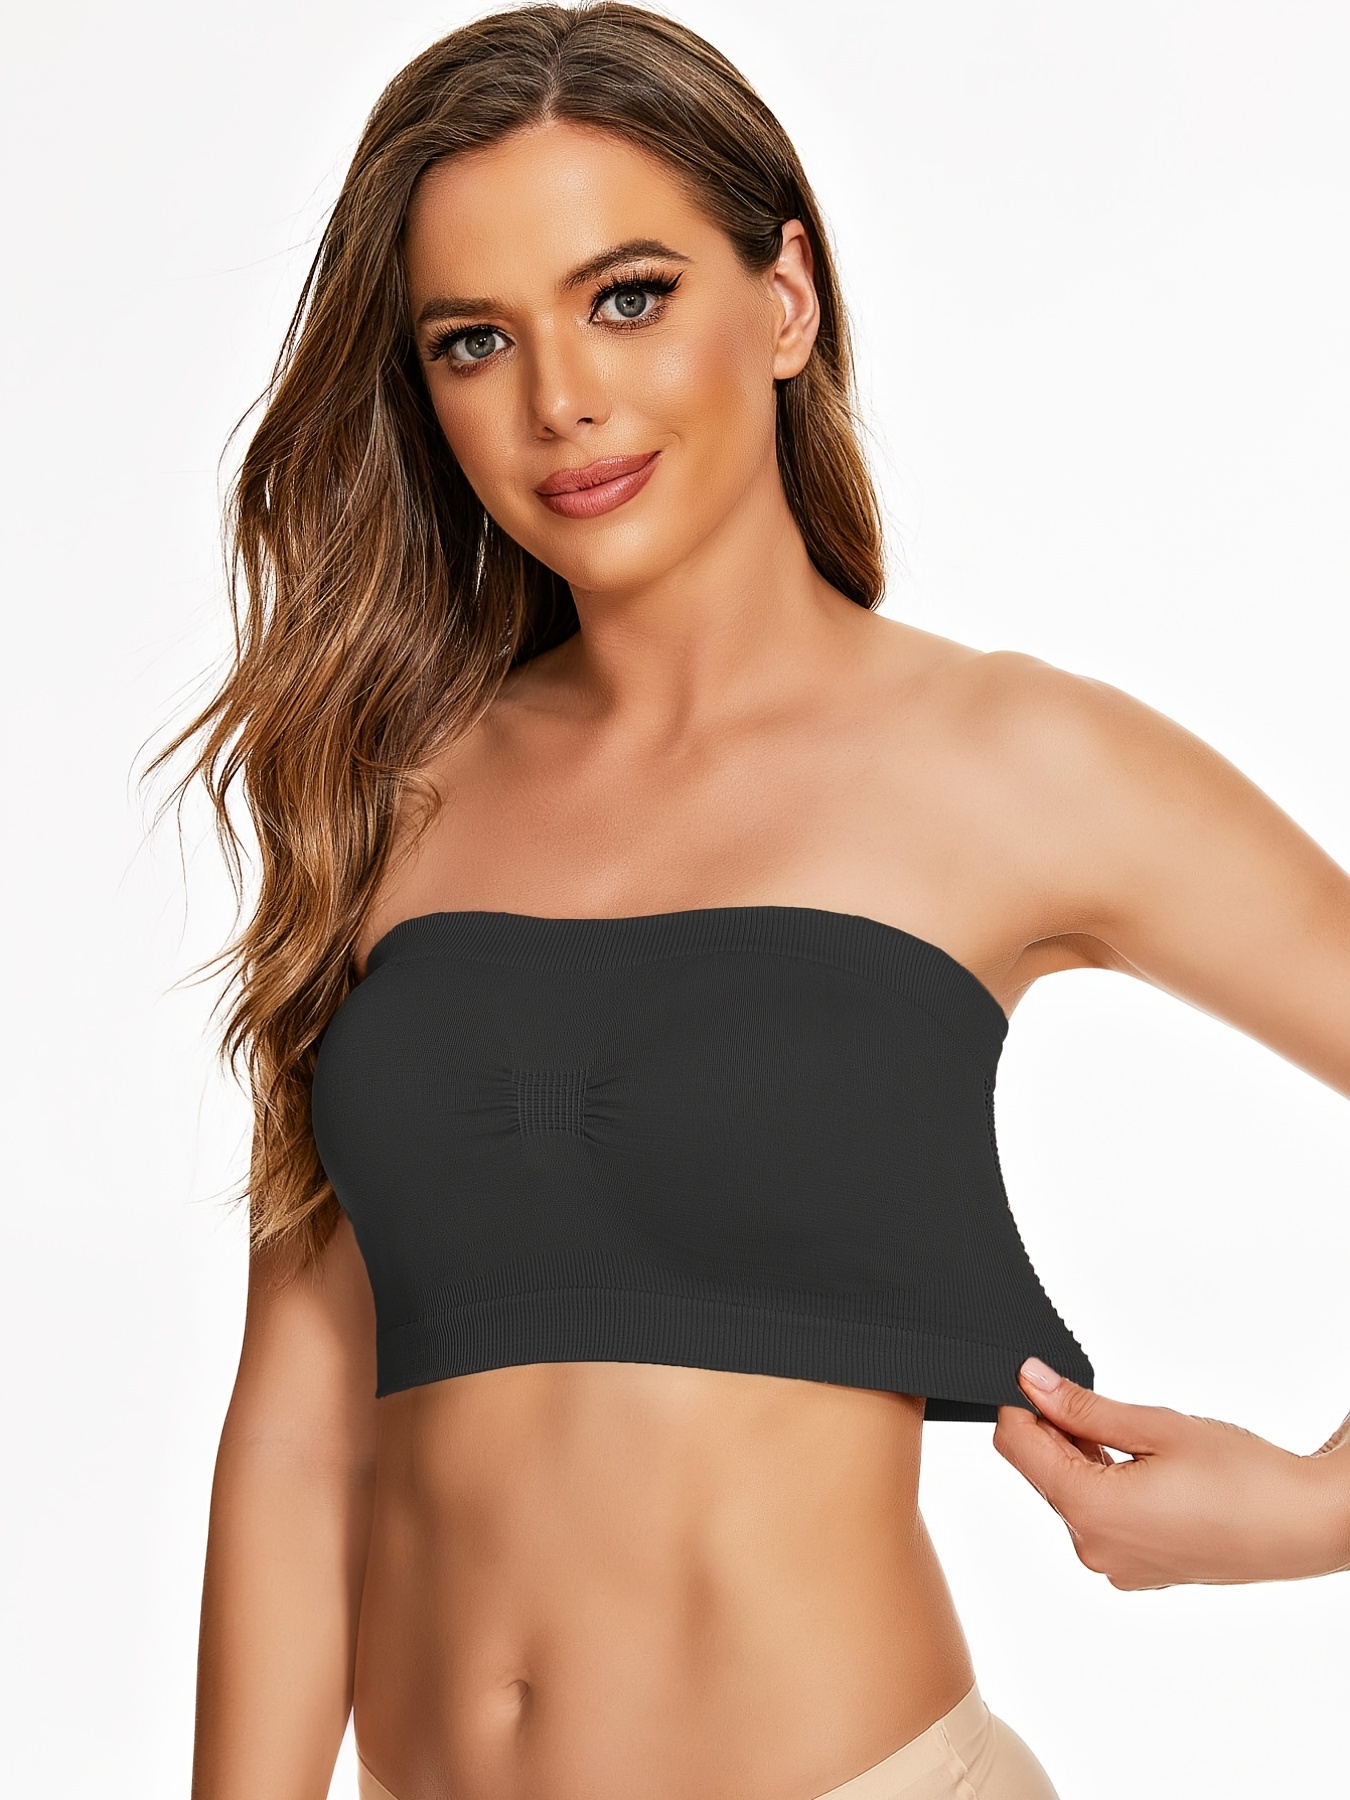 Tube Top Bra Seamless Bandeau Strapless Bralette Stretch Layering Solid  Crop Top 